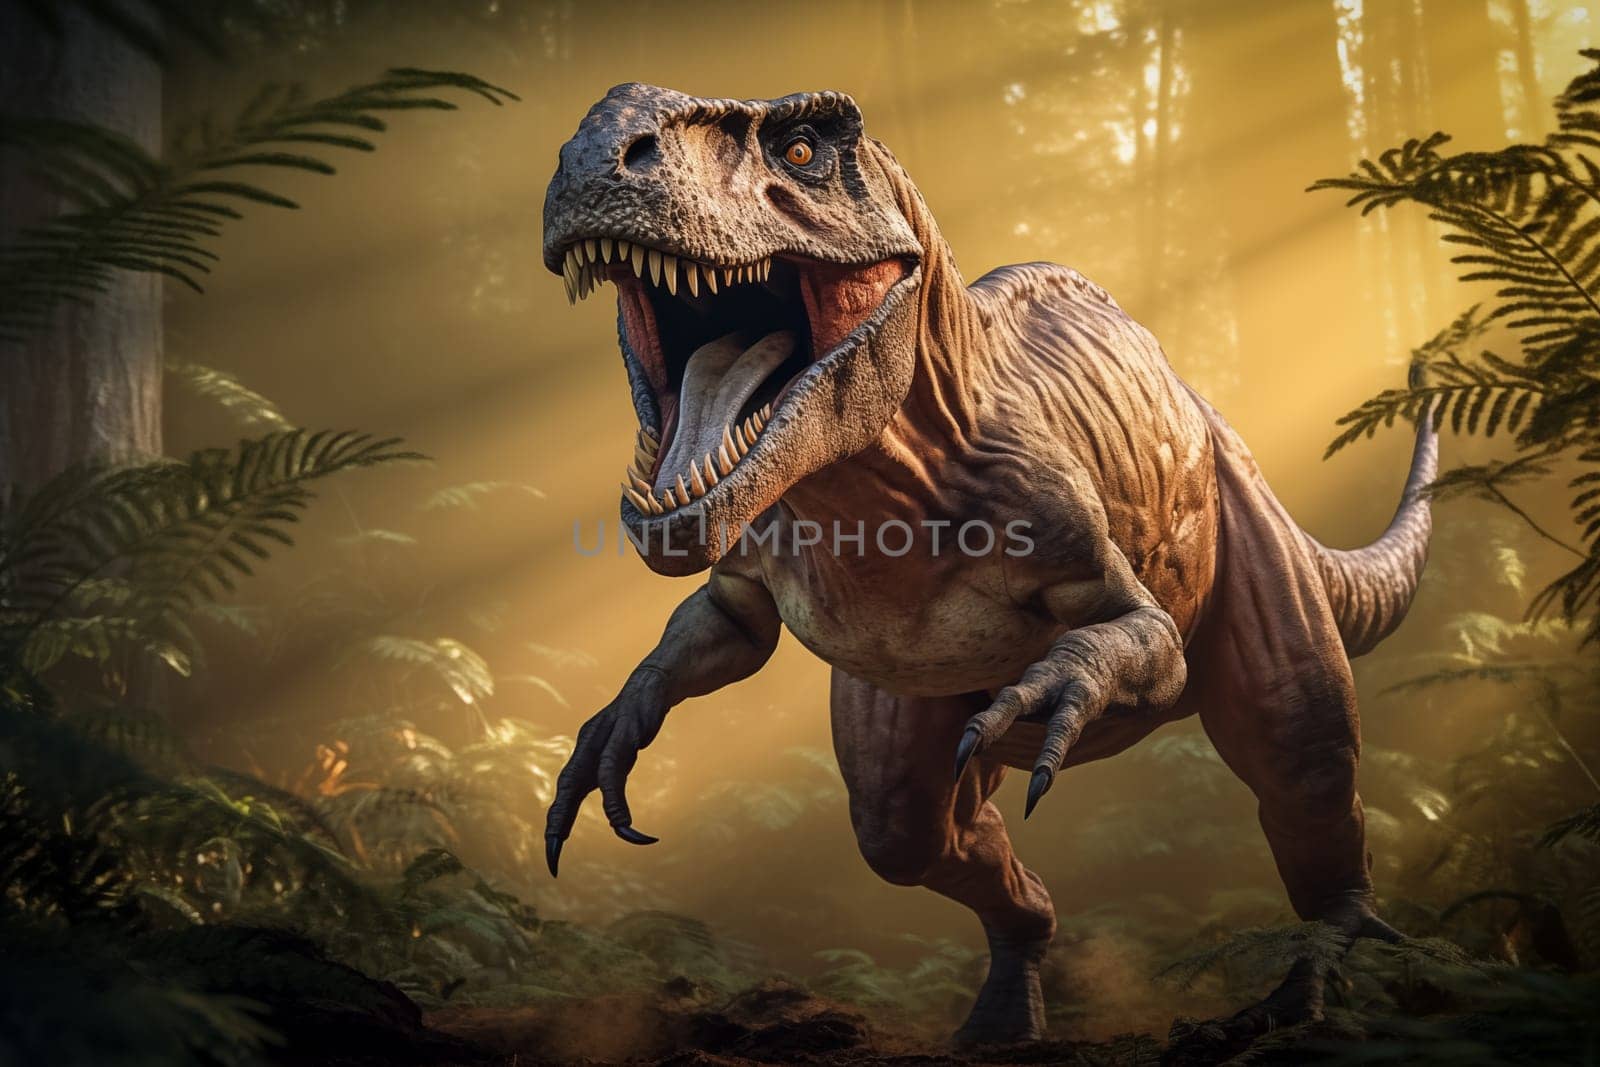 Tyrannosaurus rex roaring in a prehistoric forest with ferns and sunlight by dimol